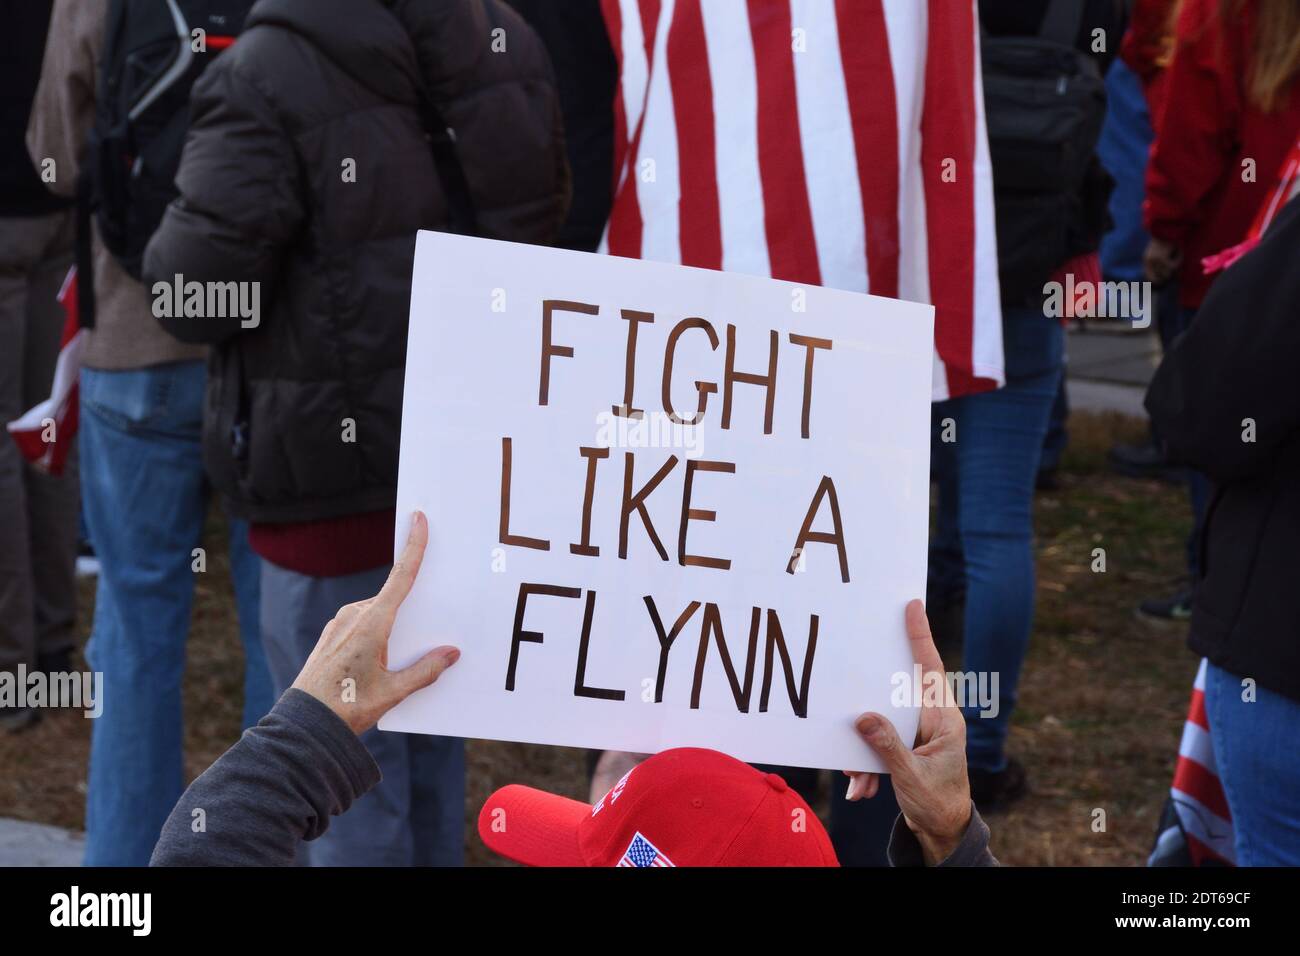 Washington DC. Dec 12, 2020. March for Trump to demand transparency and protect election integrity. Political sign ‘Fight like Flynn’ at Freedom plaza Stock Photo